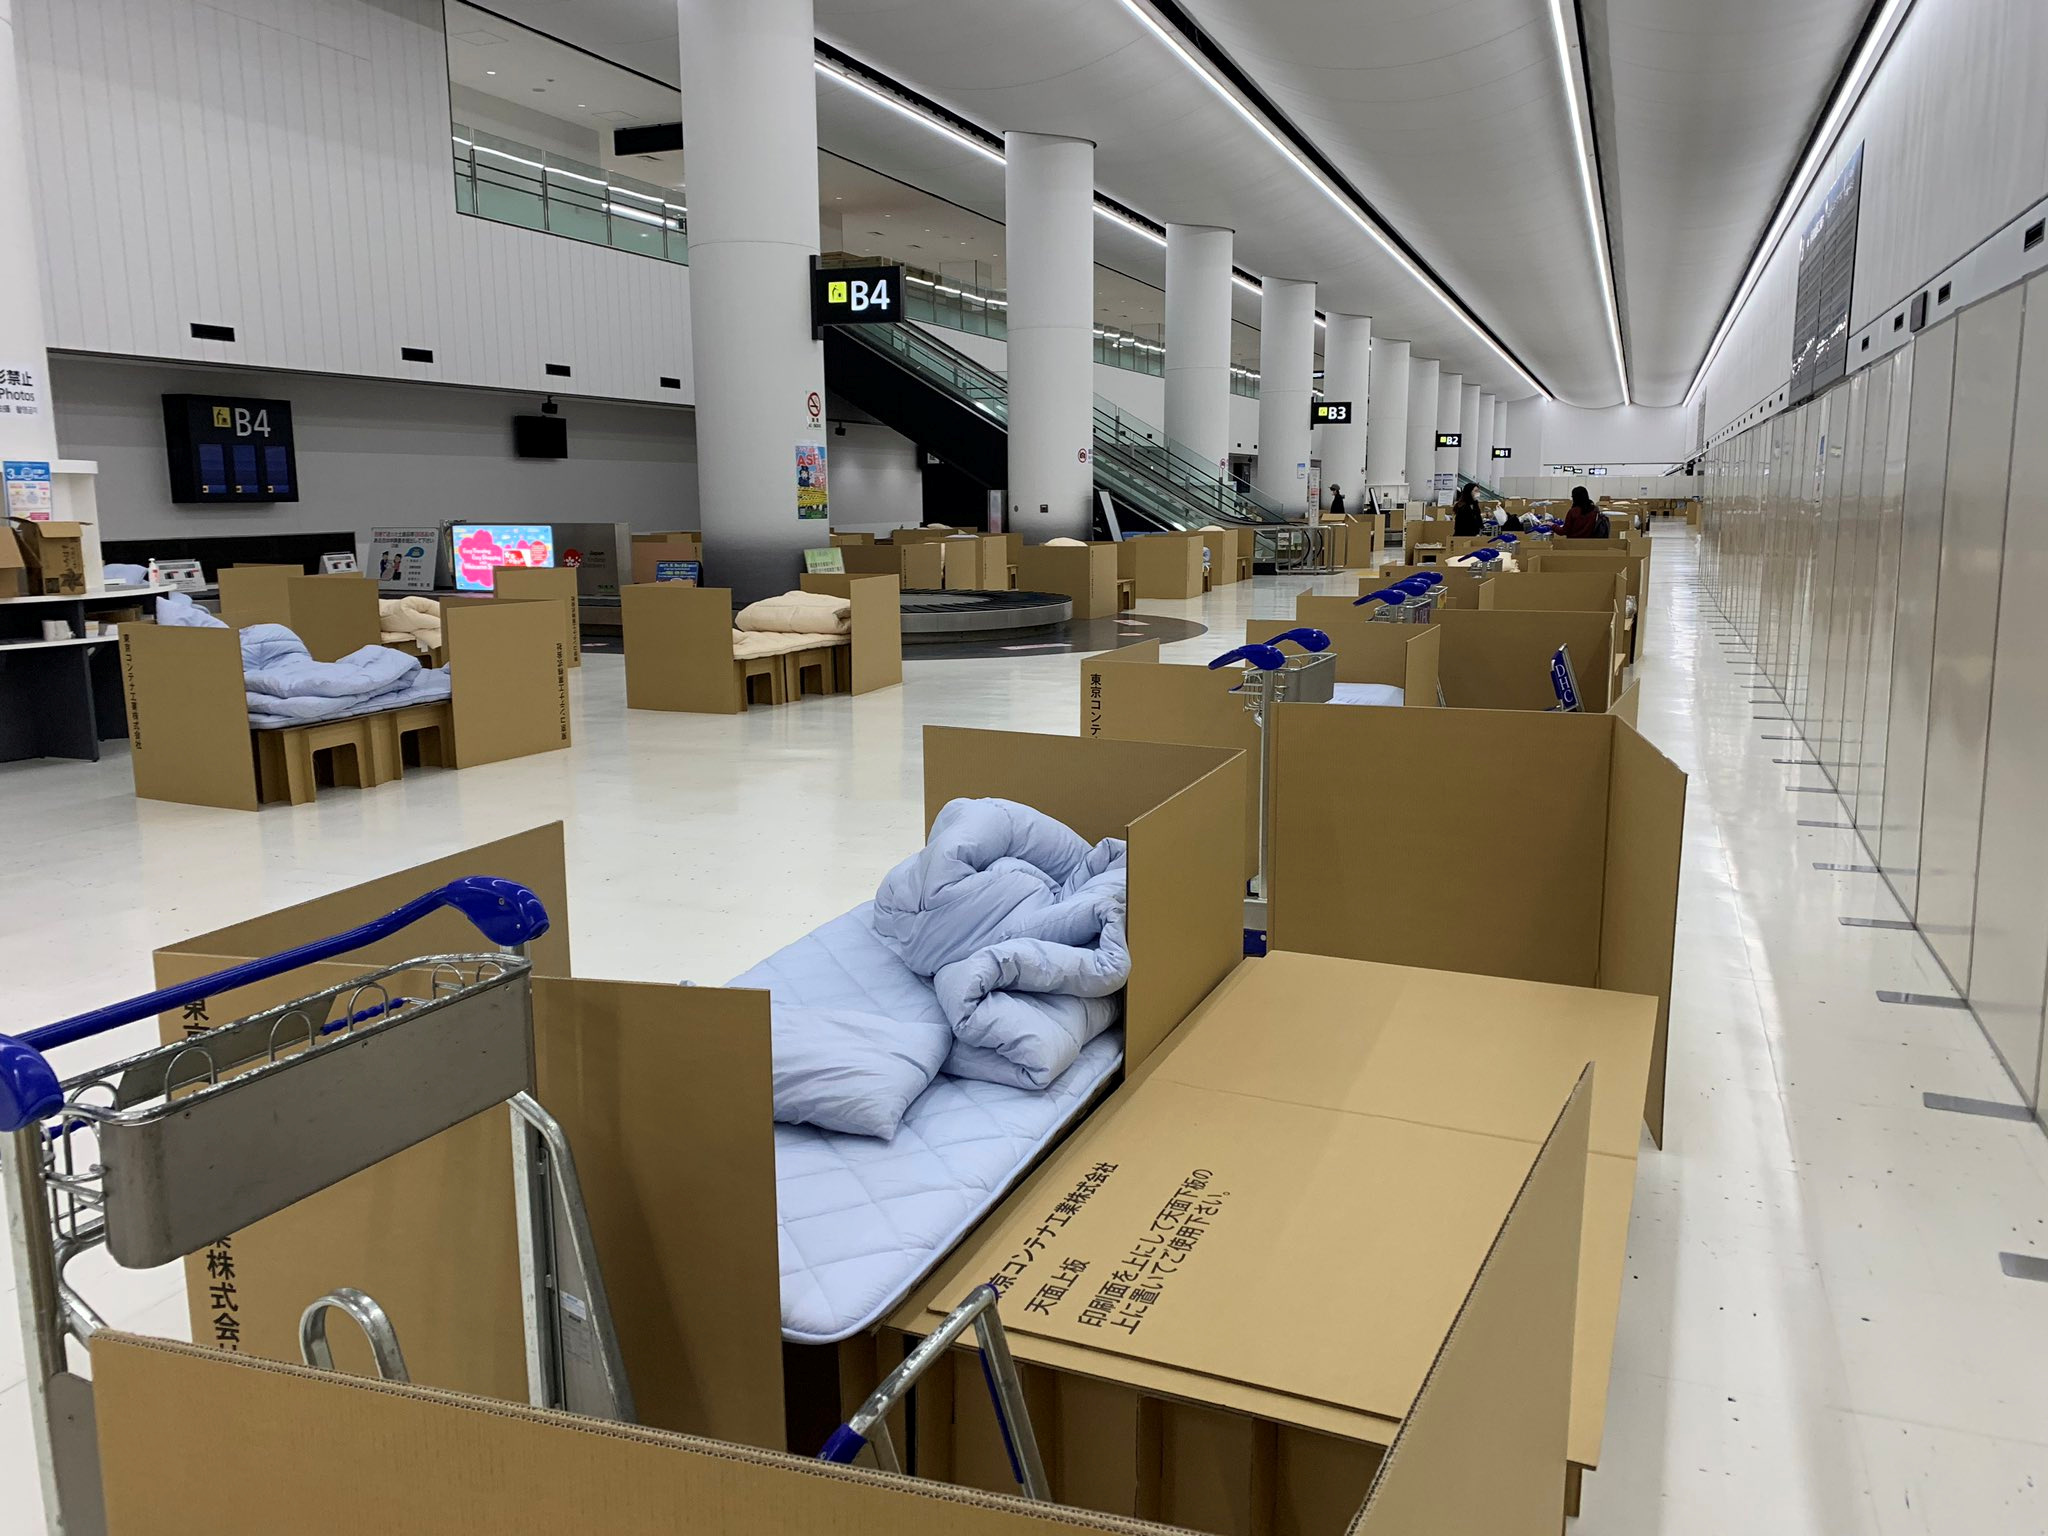 Cardboard beds are seen for passengers in Narita Airport being temporarily quarantined as they wait for the coronavirus disease (COVID-19) test results in Narita